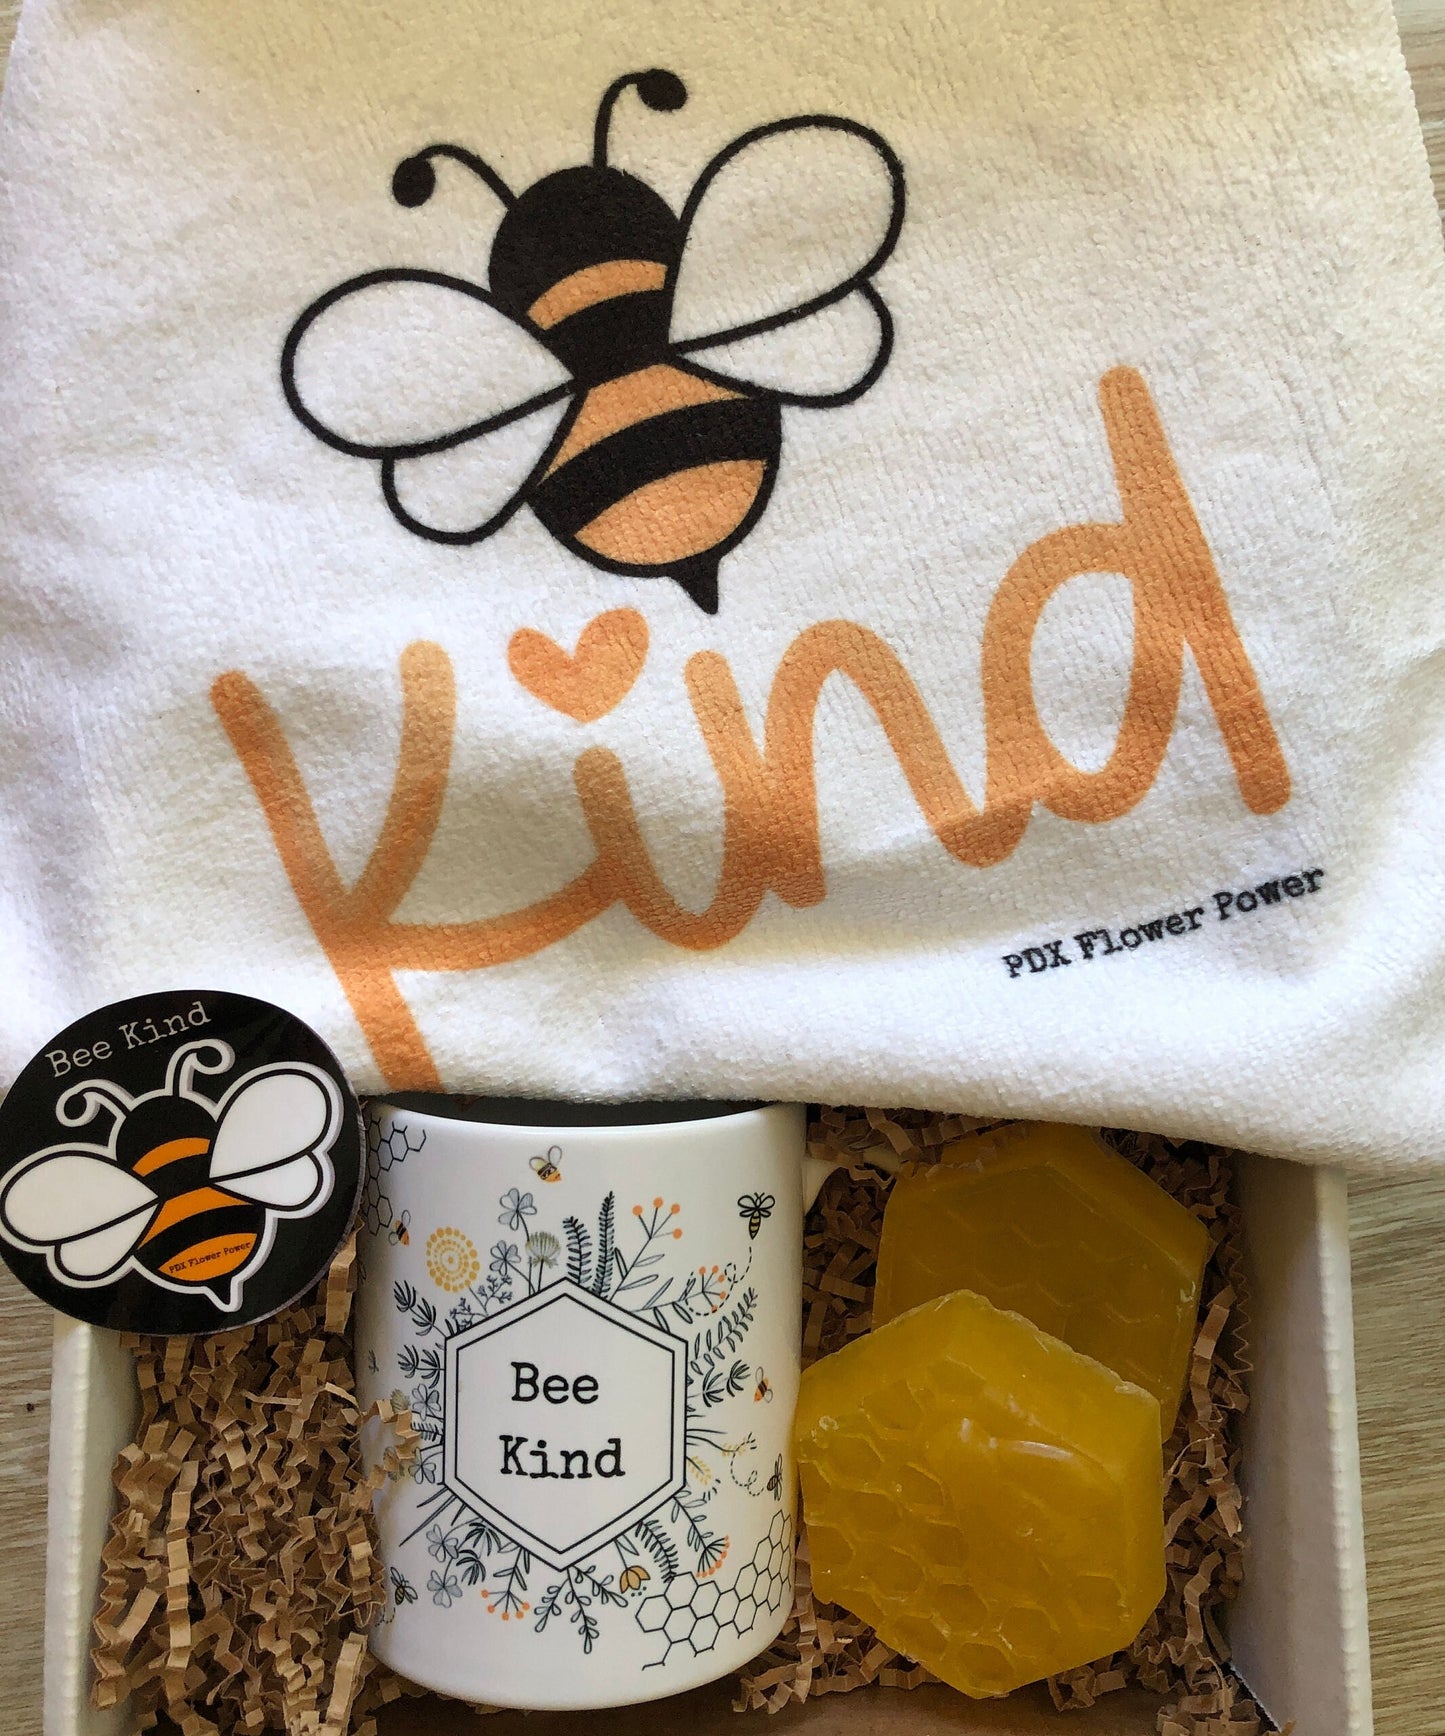 PDX Flower Power "Bee Kind Gift set", bee themed gift set, Bee kind mug, Bee kind Soaps, Bee sticker. Bee kind wash cloth, cute matches